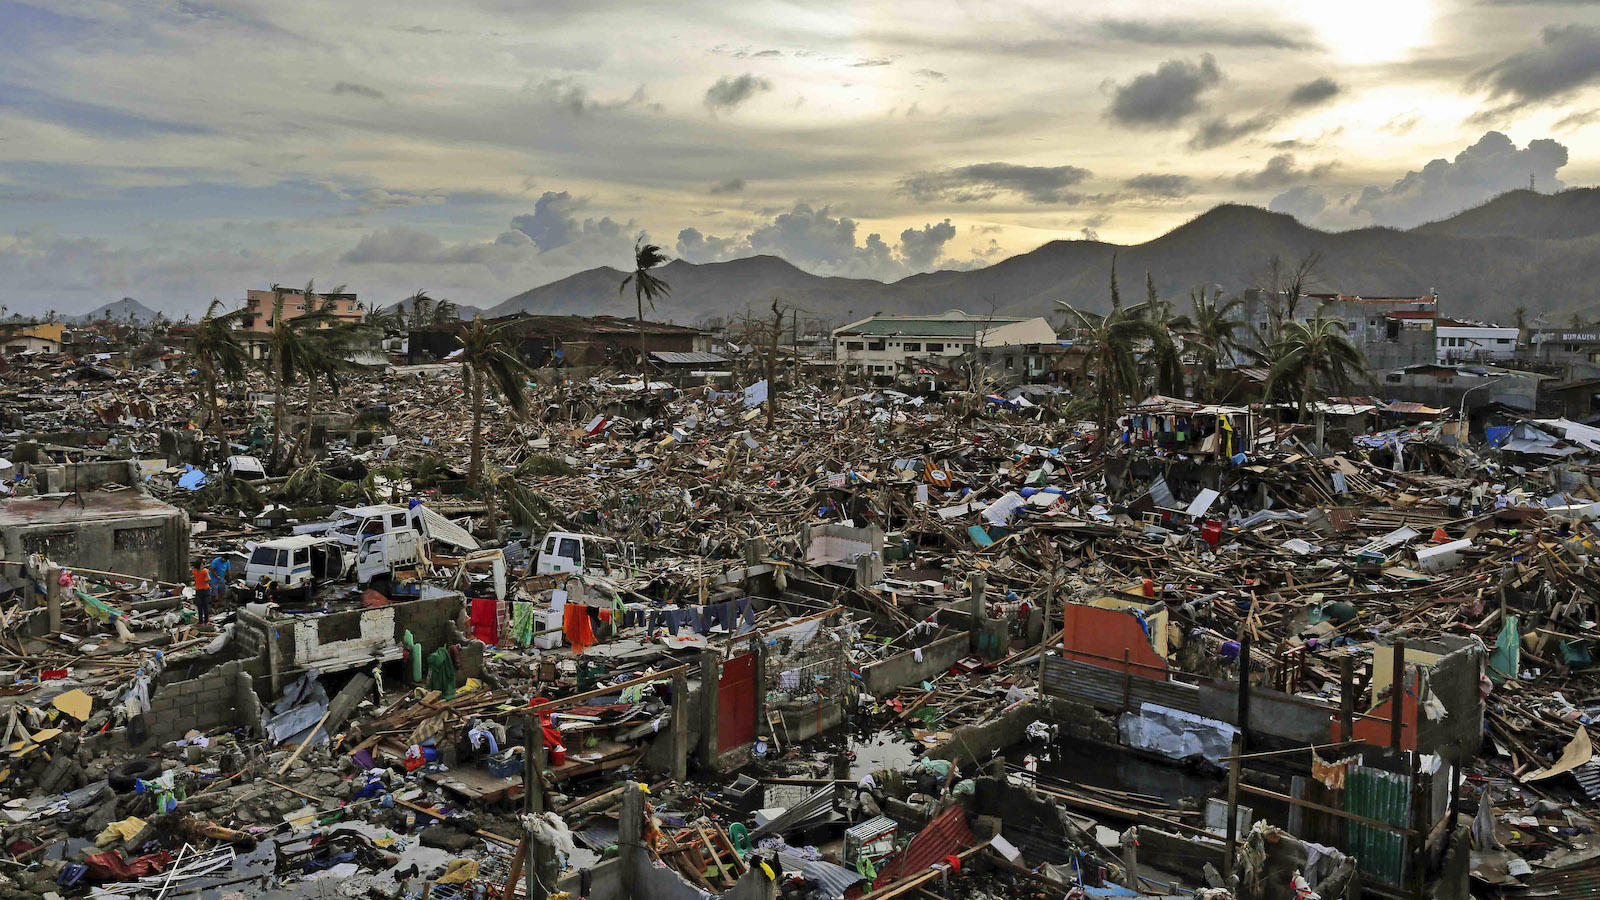 A neighborhood destroyed by Typhoon Yolanda in the Philippines in 2013